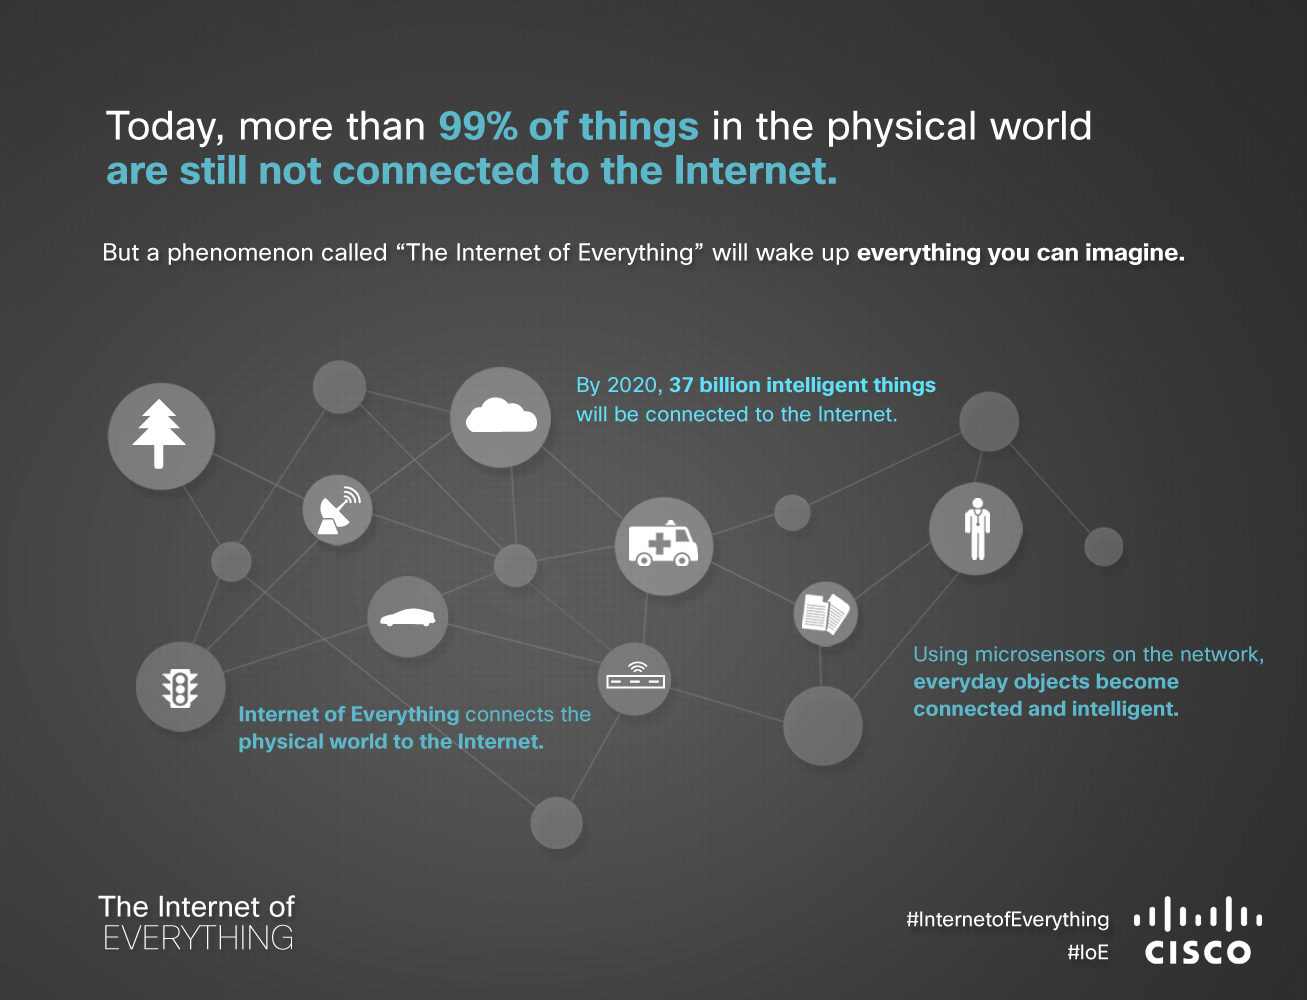 Today, more than 99% of things in the physical world are still not connected to the Internet.